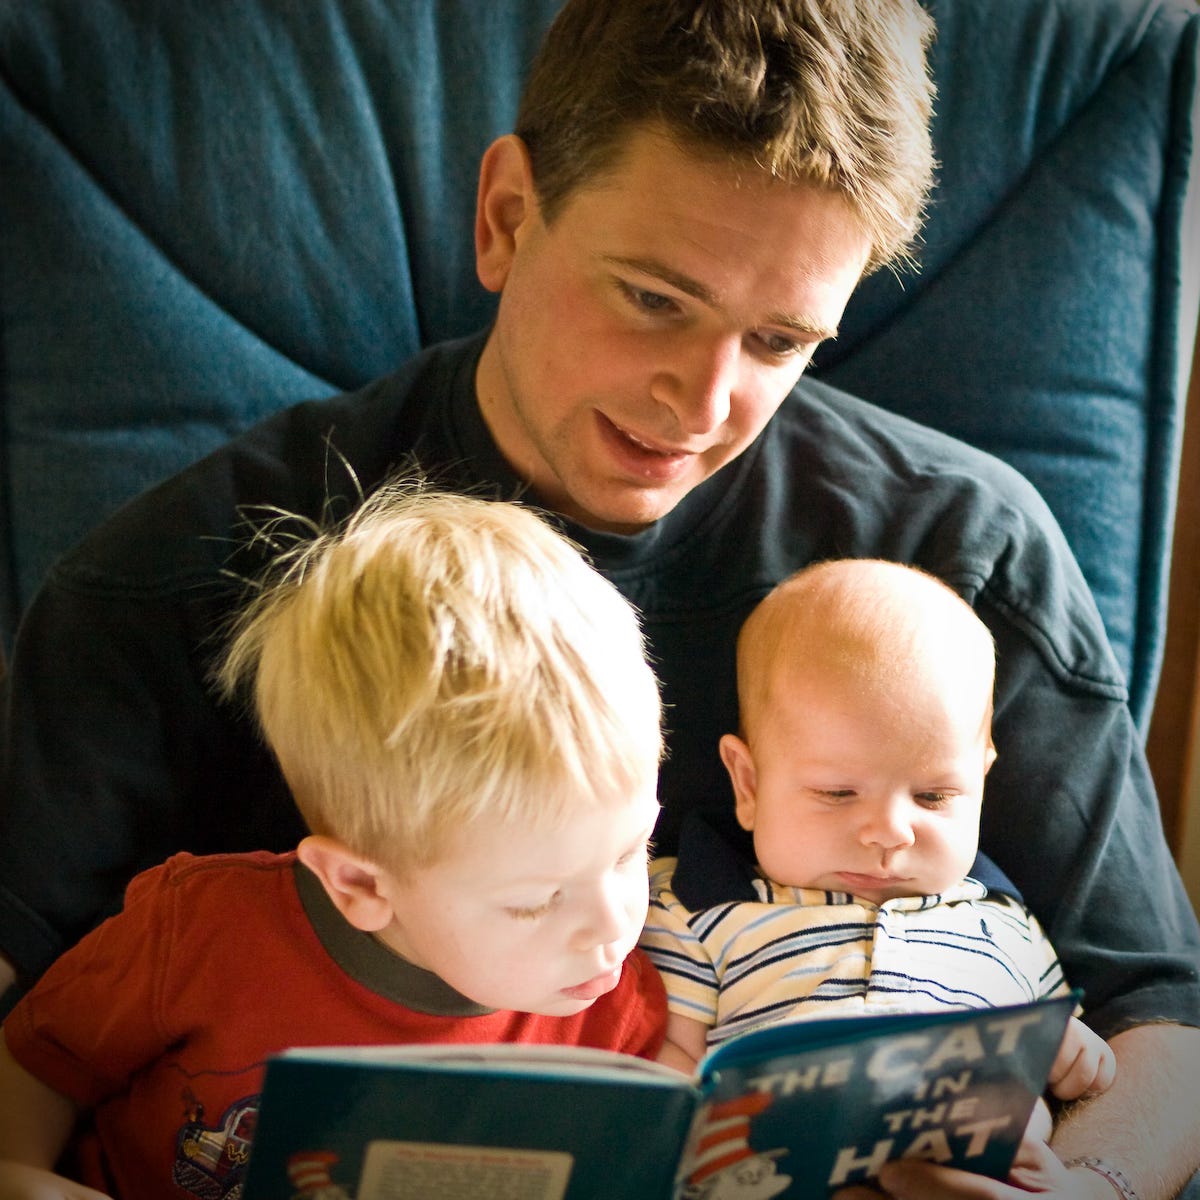 A man reads The Cat and the Hat to two young boys.